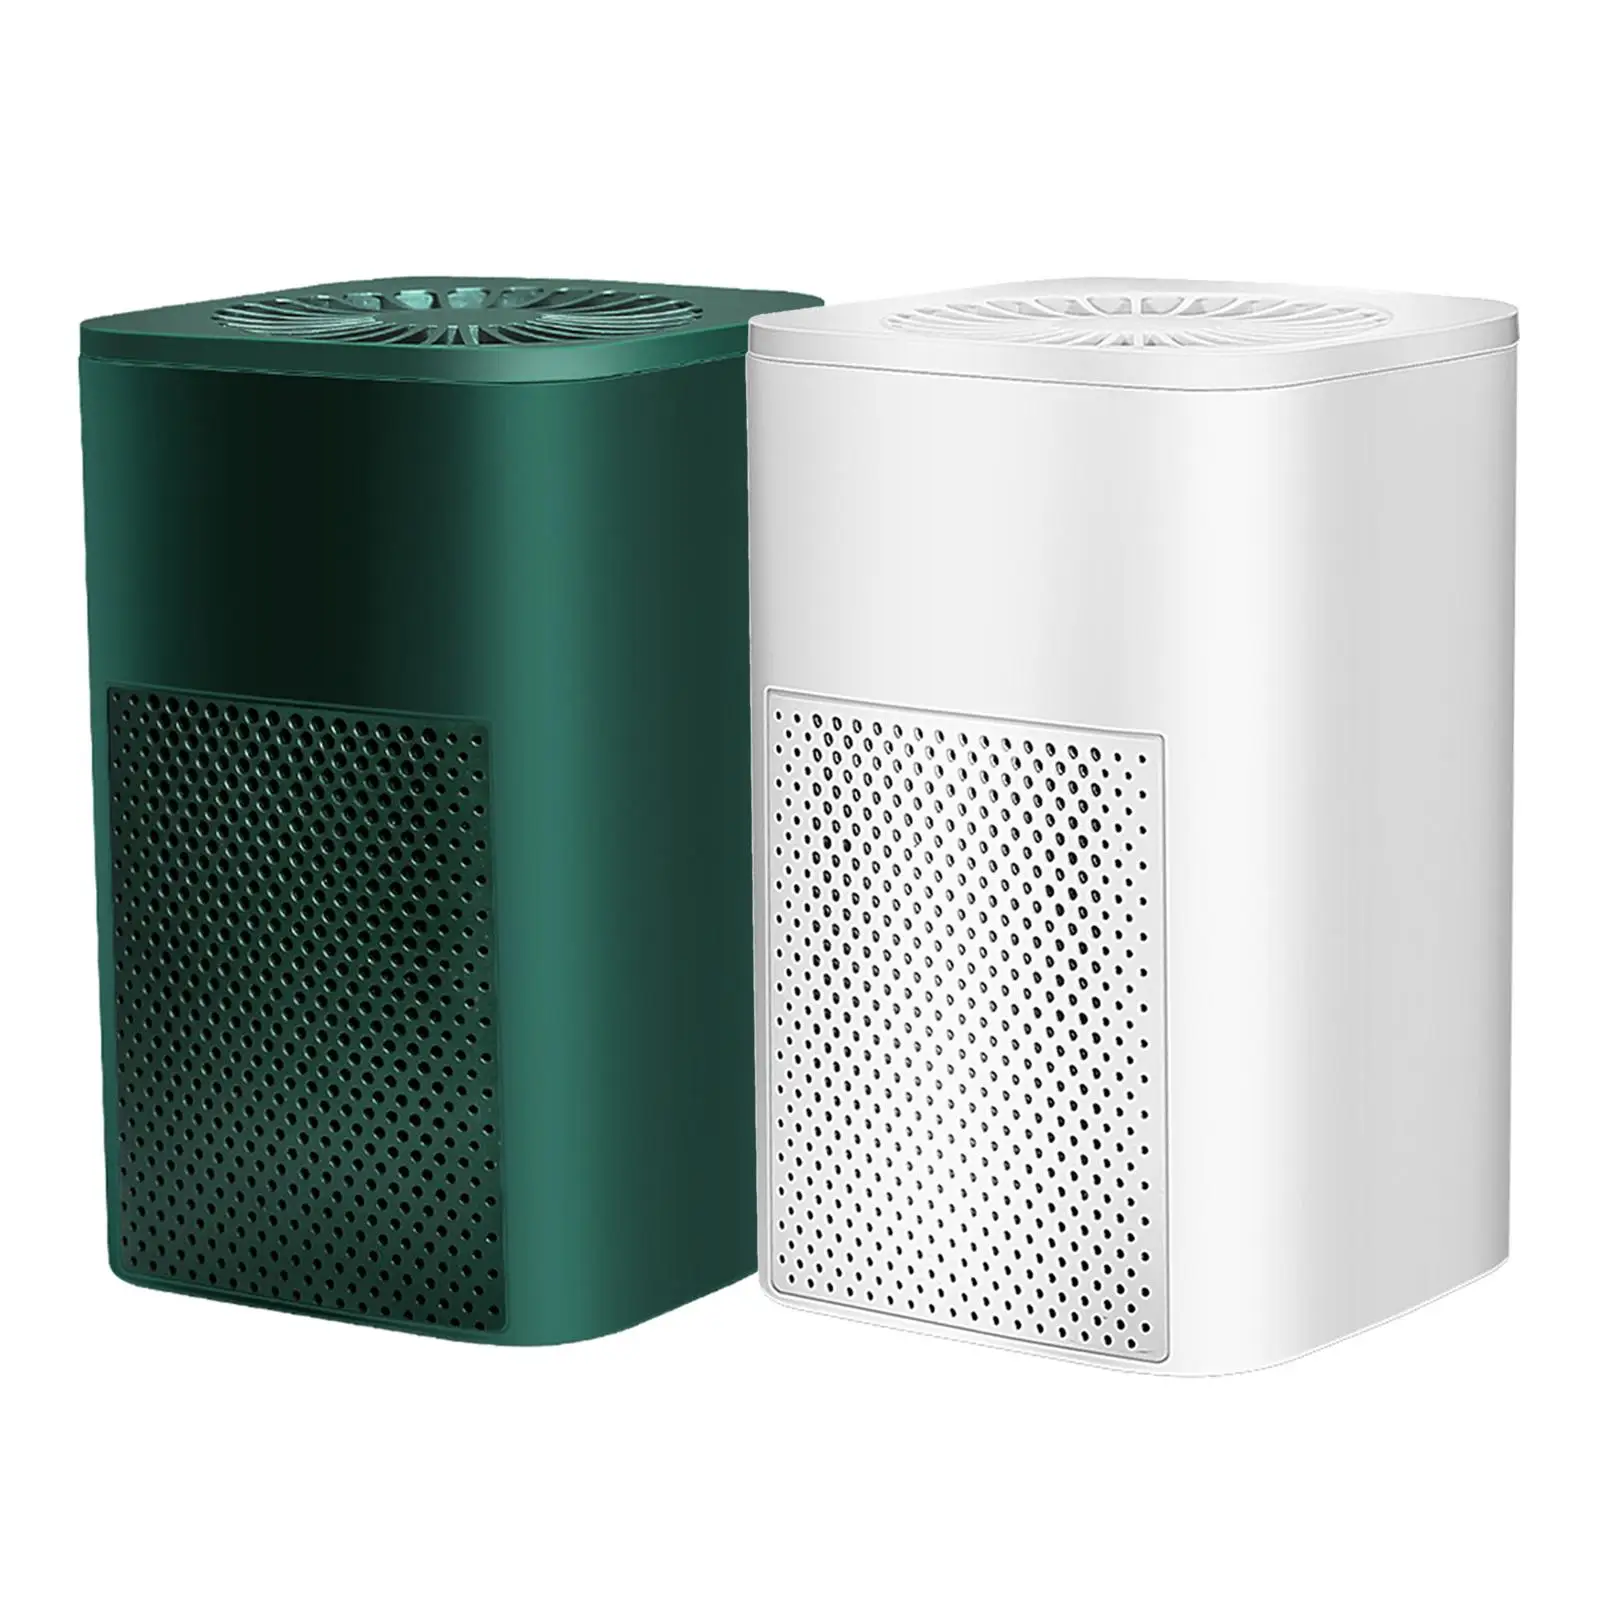 Portable air Purifiers 2 Layer Activated Carbon  USB Powered Desktop 35dB air cleaners Removes Pollen Particles Smoke Odor